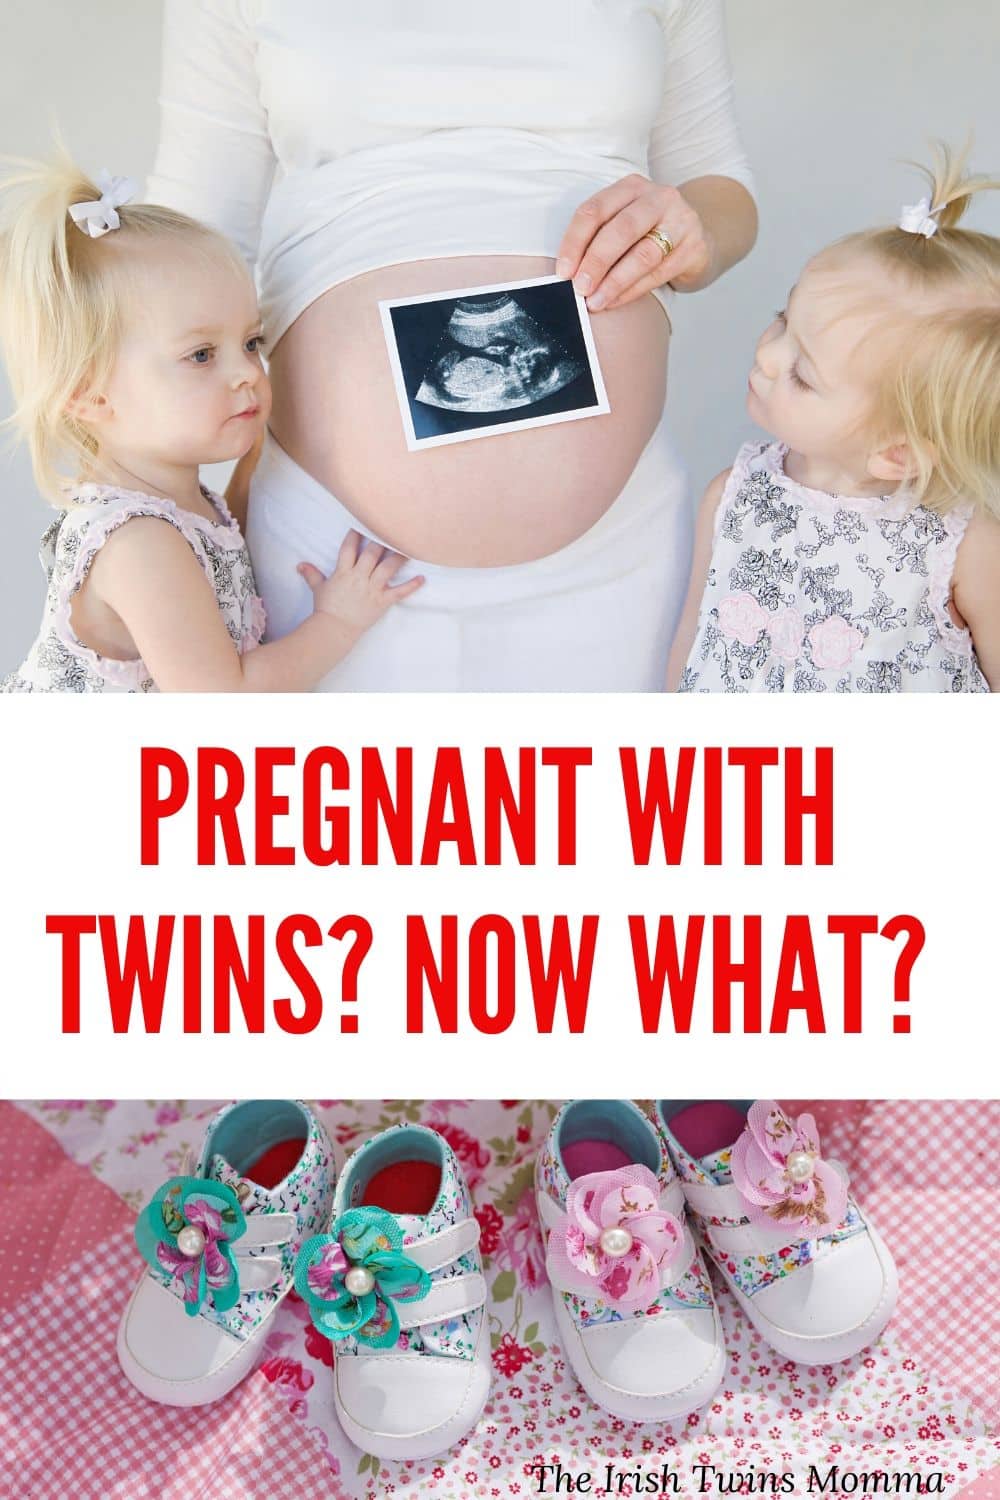 Pregnant with twins?